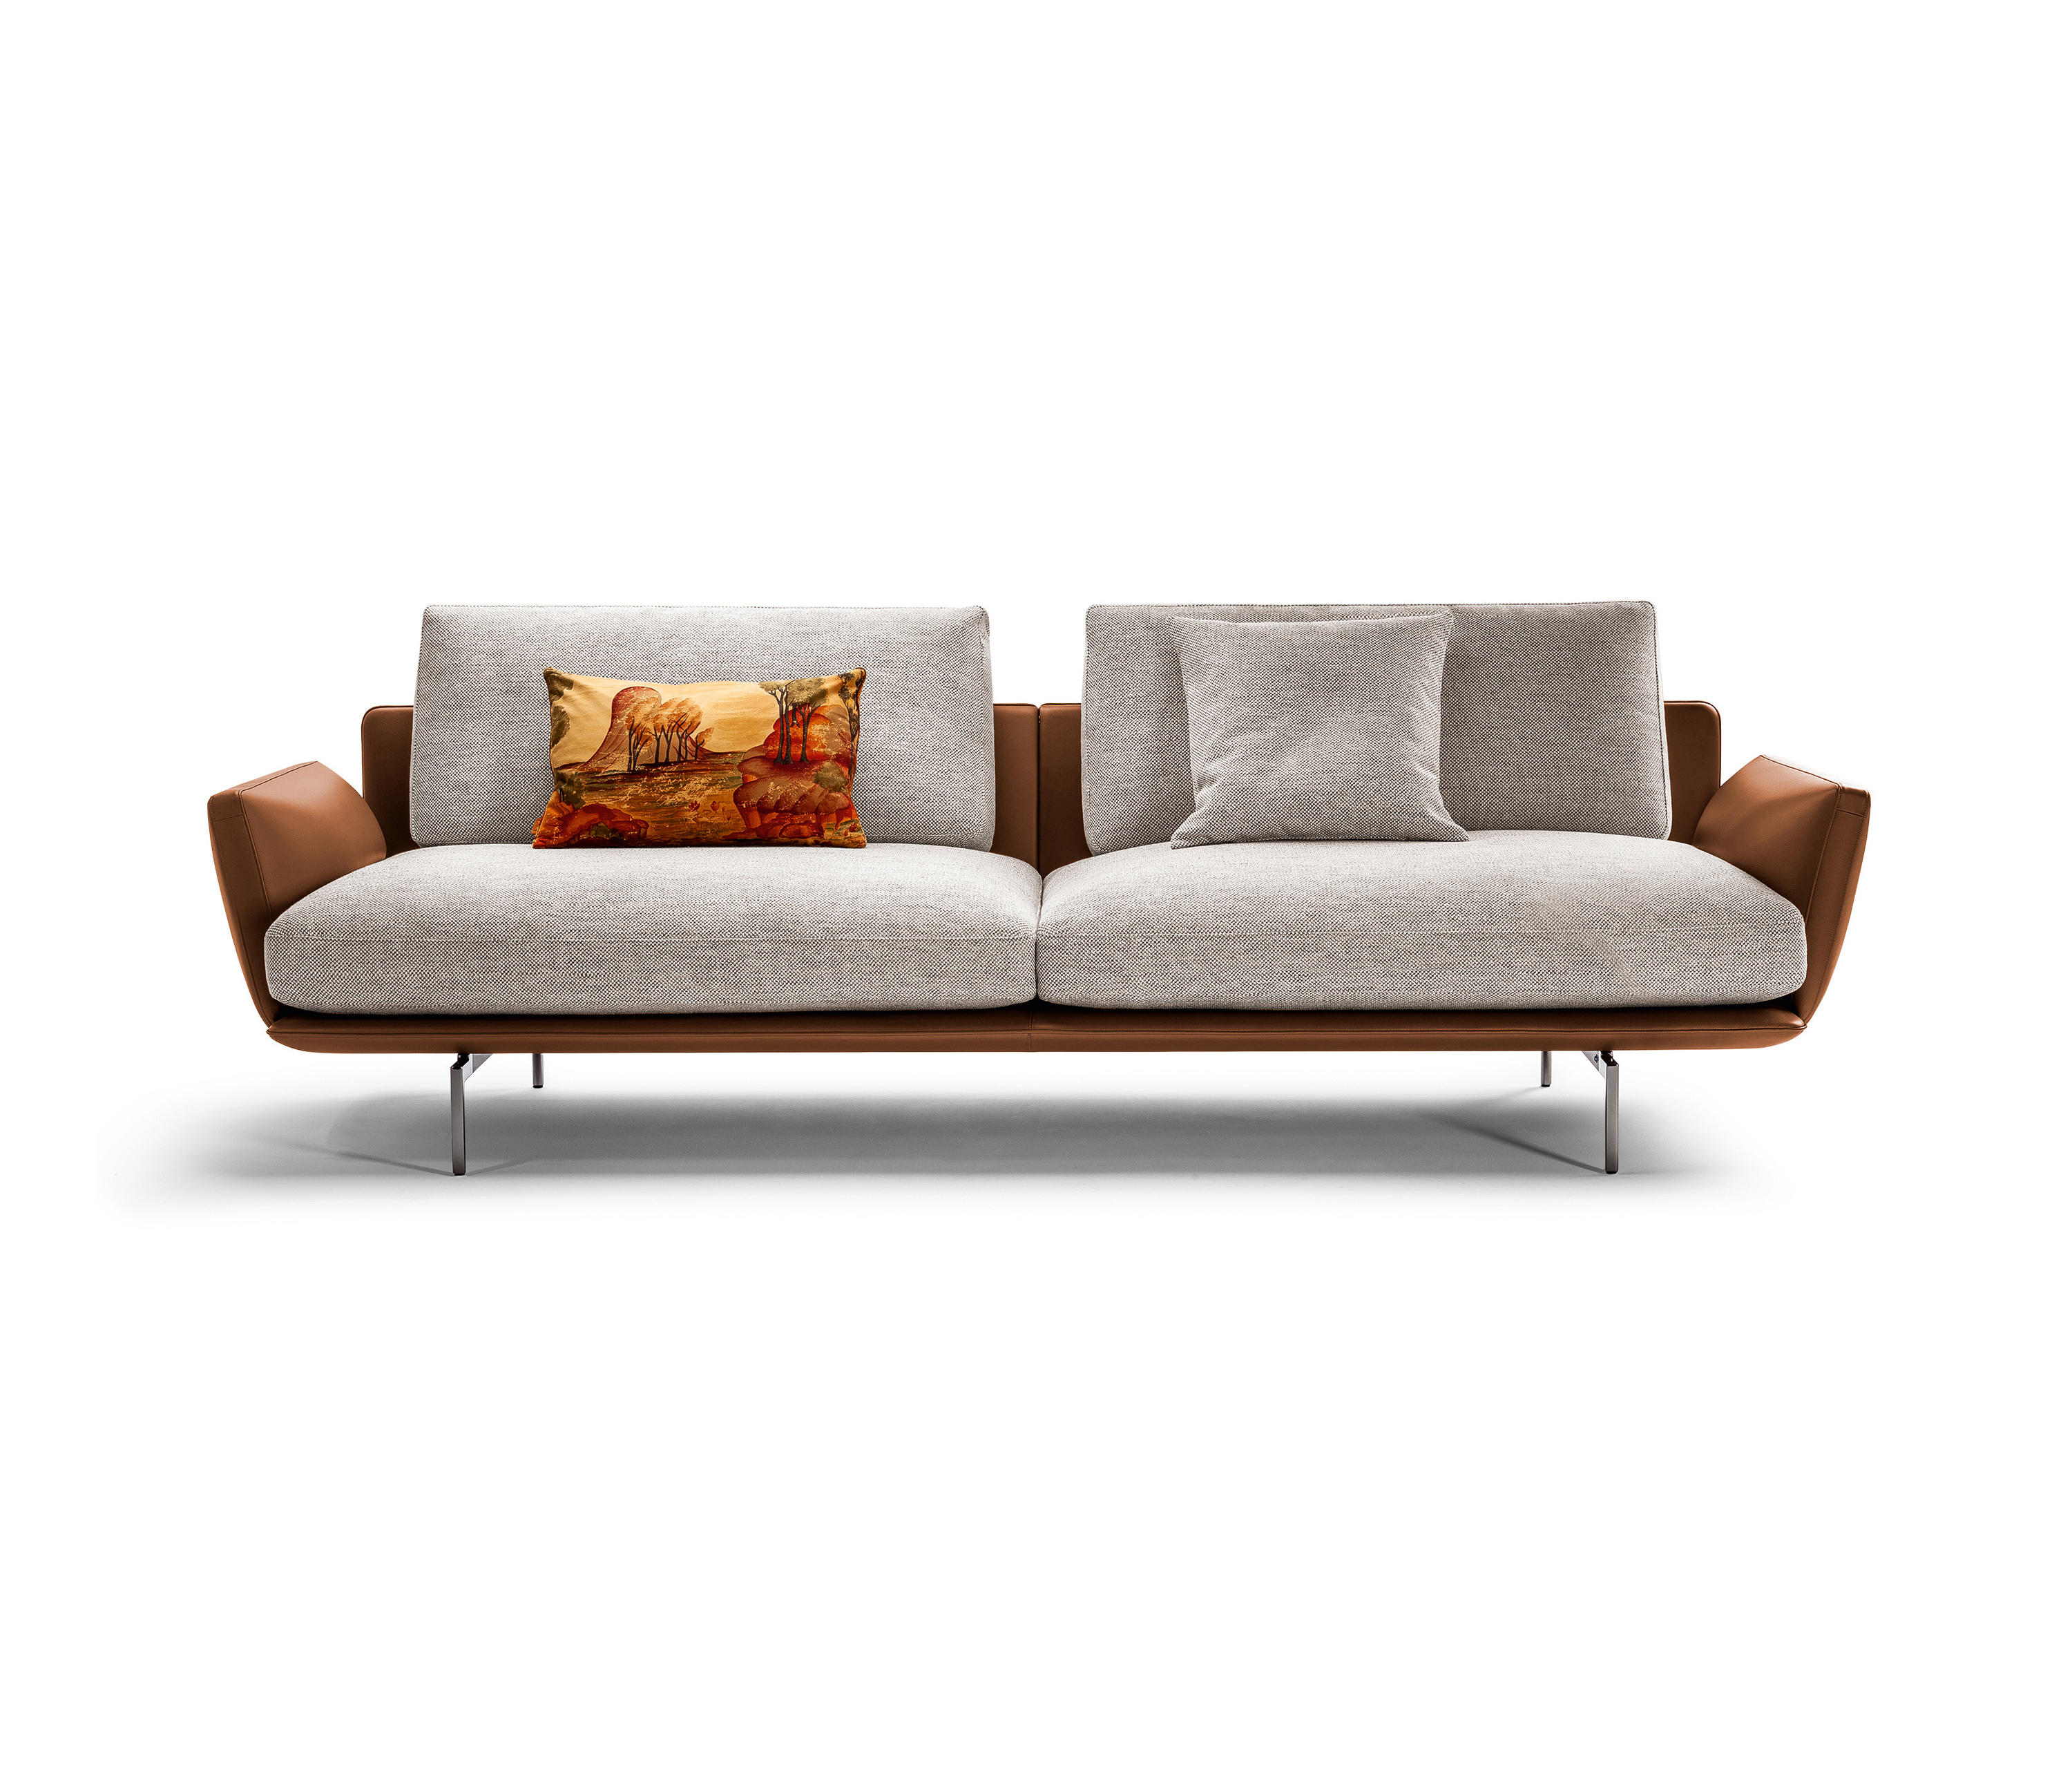 Slepen Baars Vies GET BACK - Sofas from Poltrona Frau | Architonic